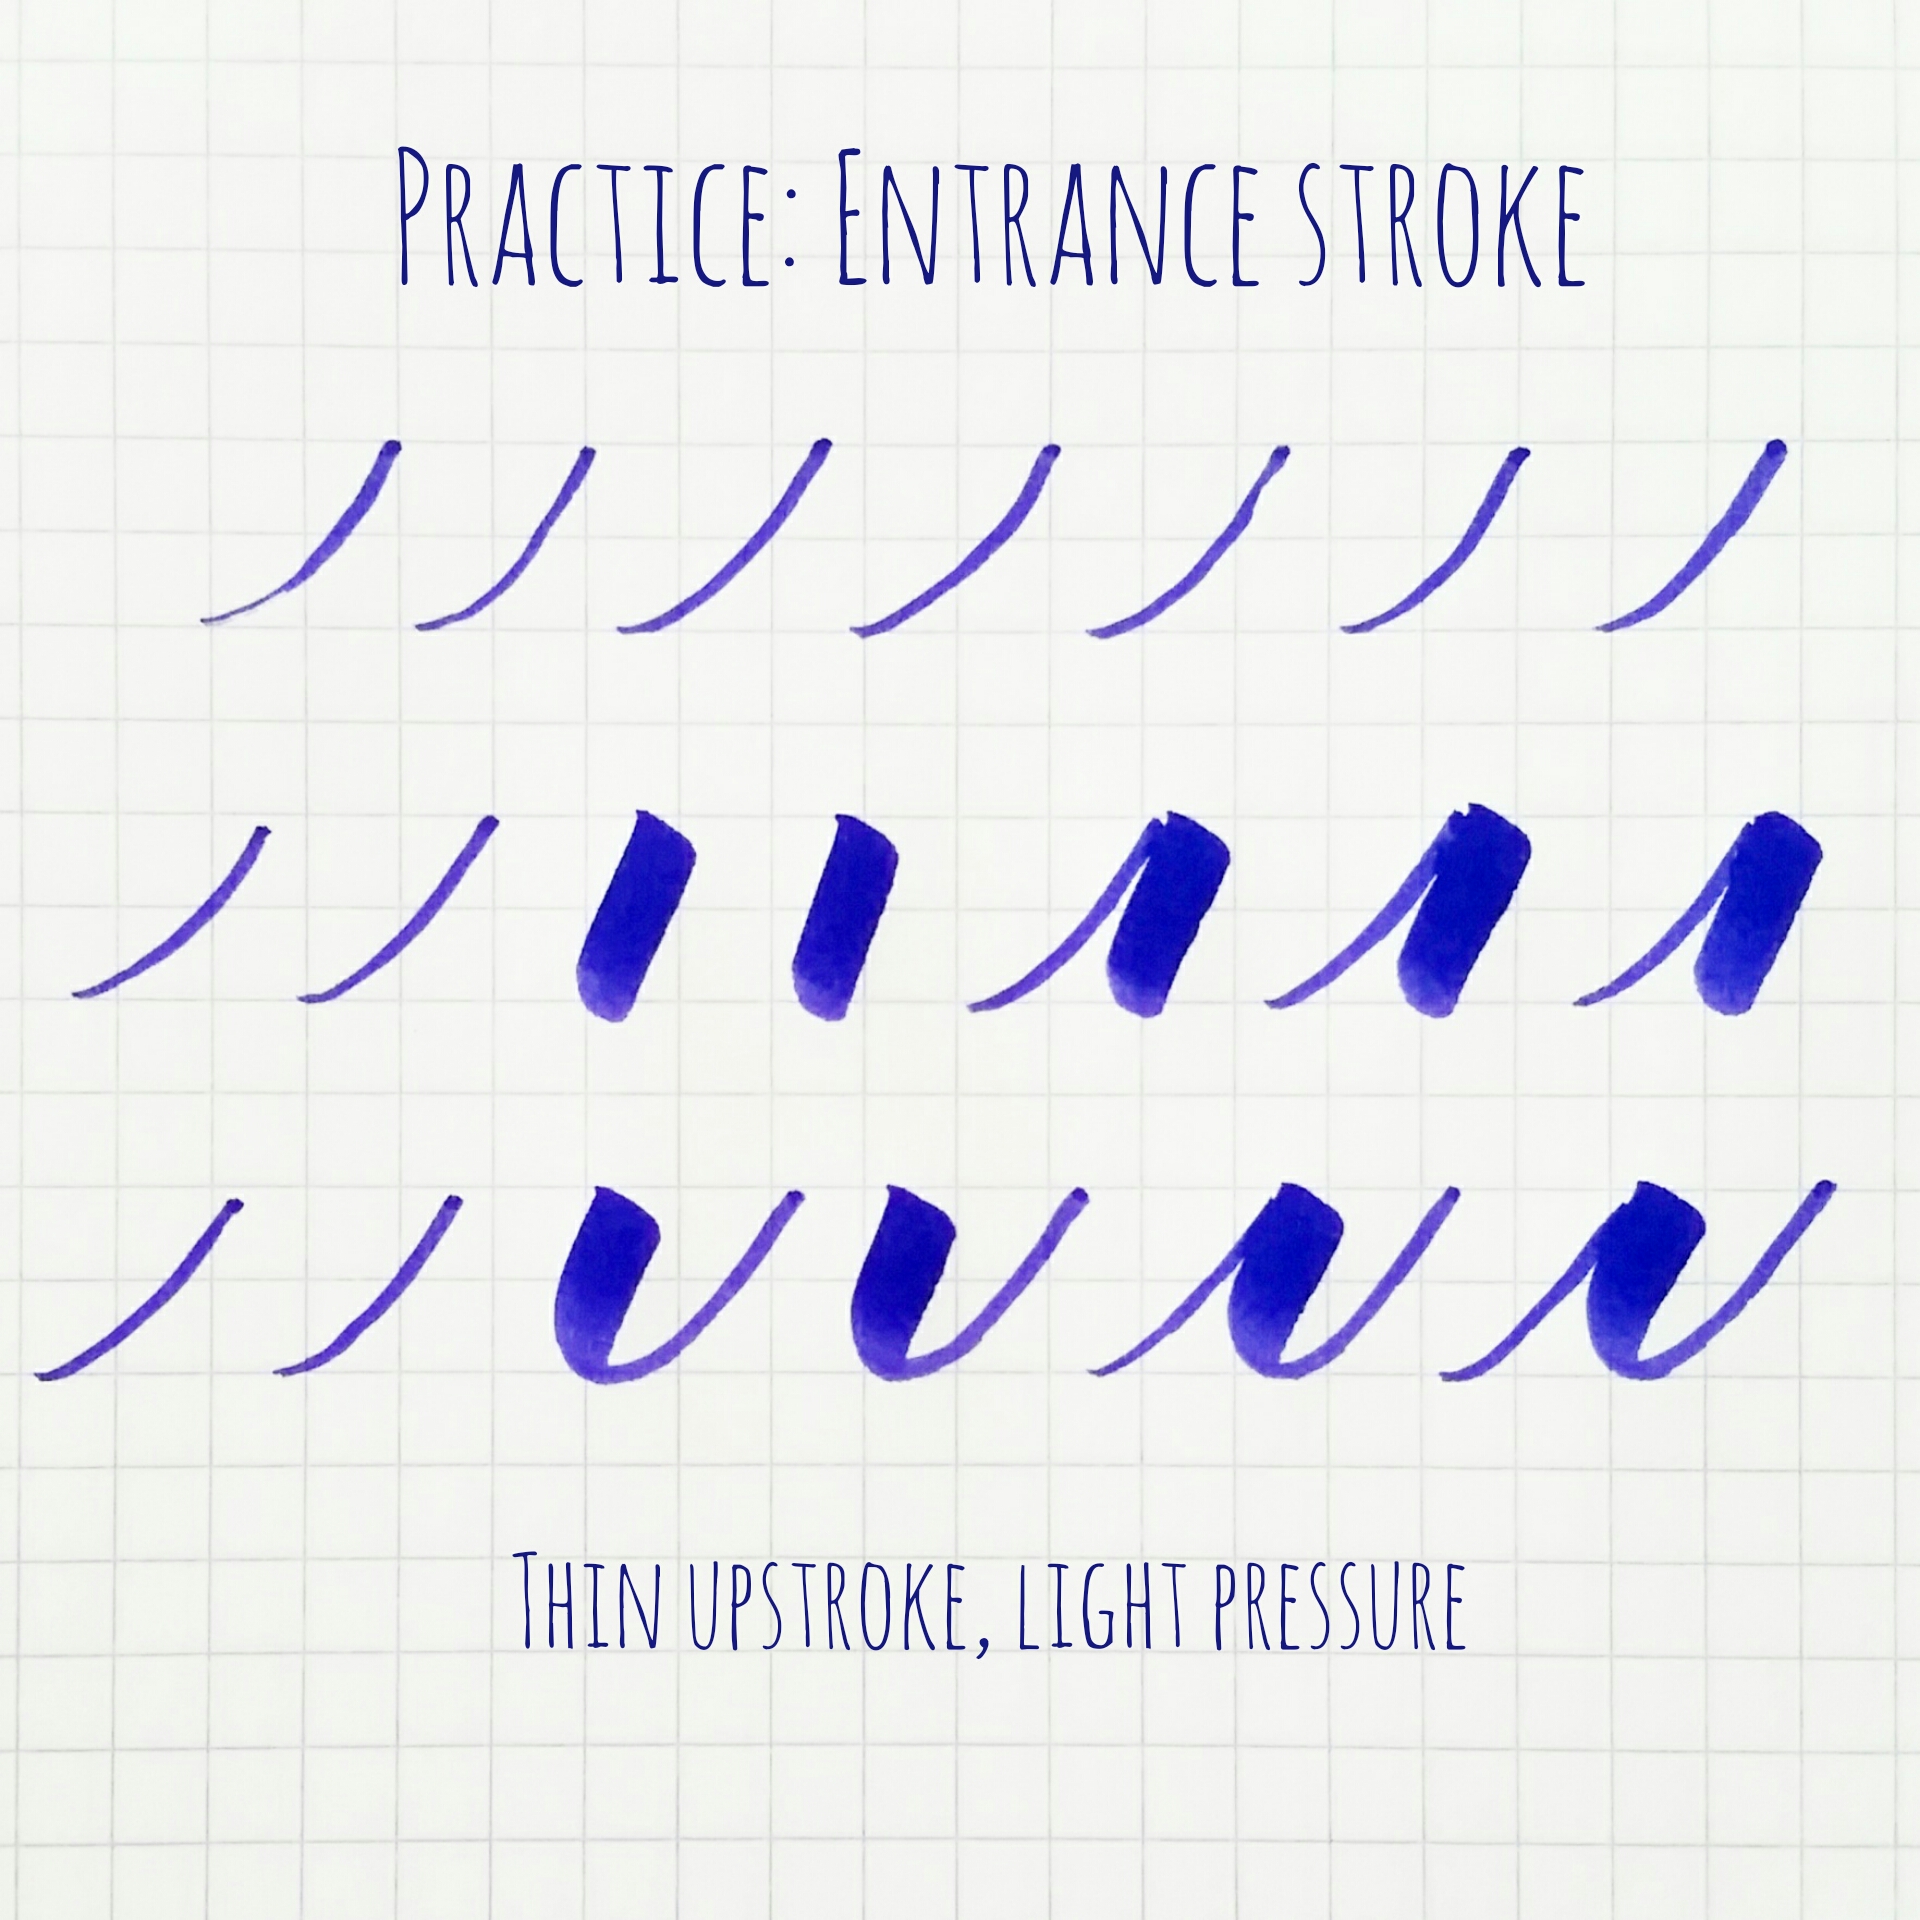 Calligraphy Strokes Chart